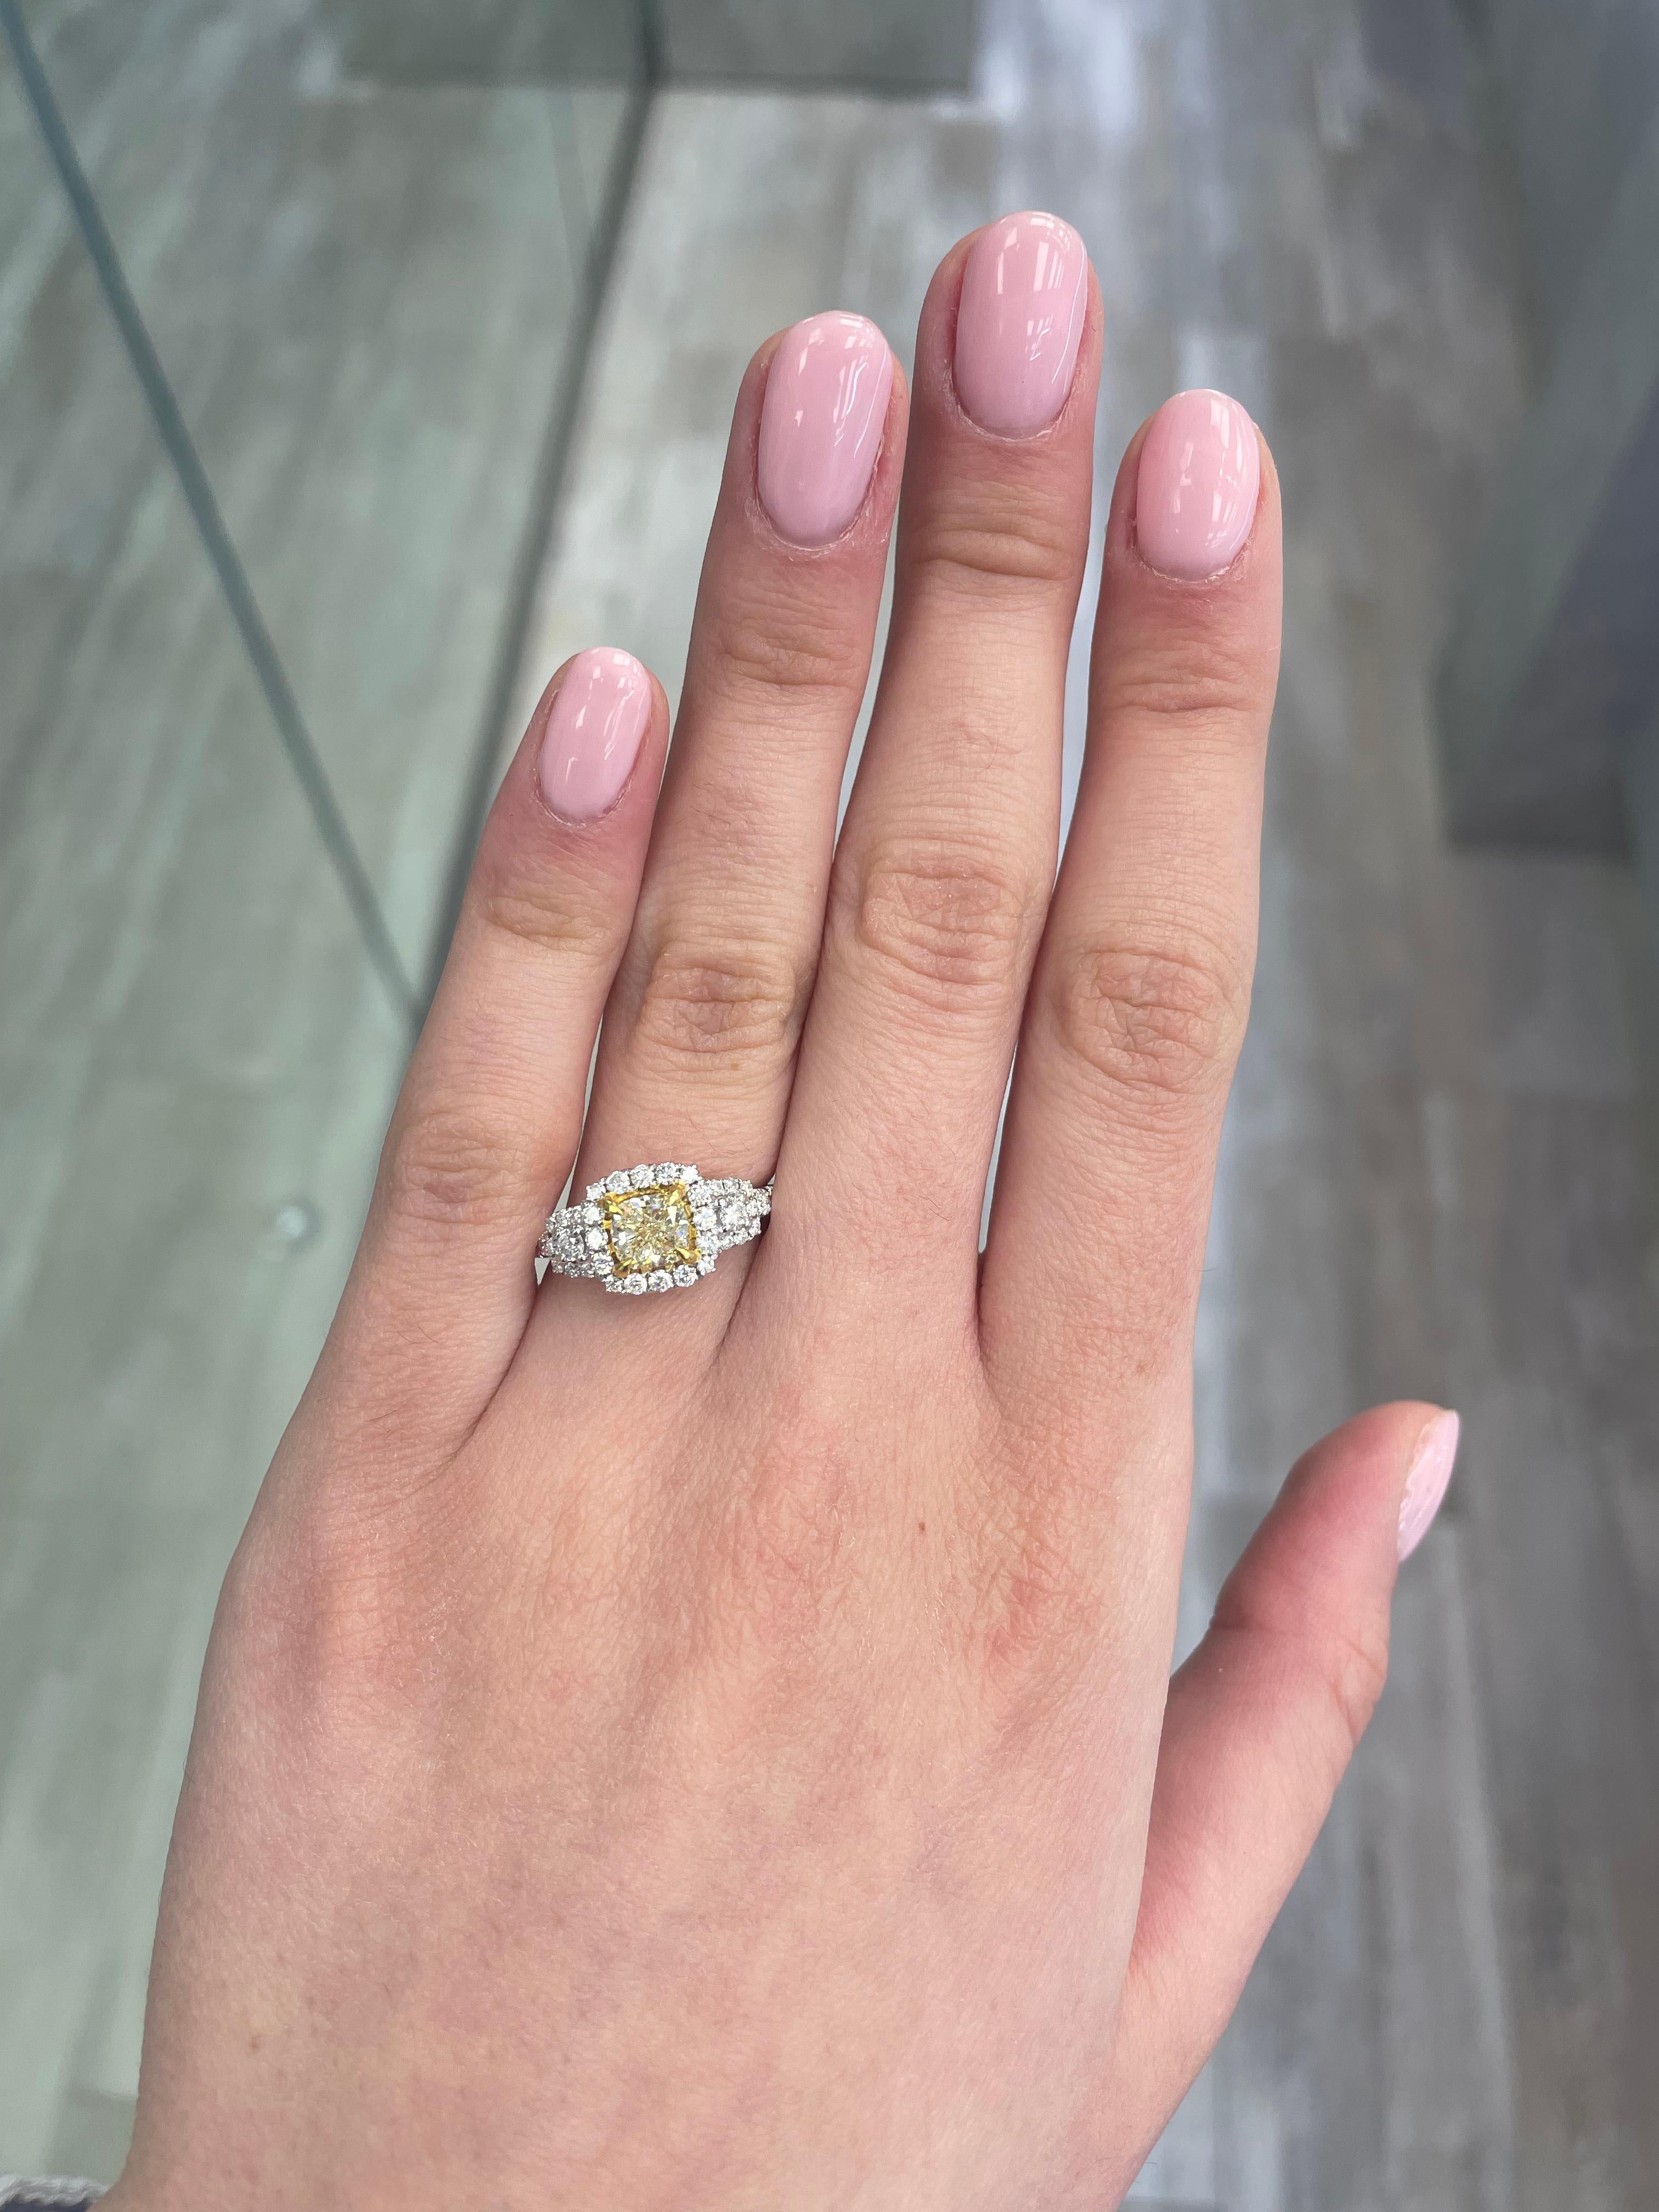 Stunning modern EGL certified fancy yellow diamond three stone halo ring, two-tone 18k yellow and white gold. By Alexander Beverly Hills
1.74 carats total diamond weight.
1.01 carat cushion Fancy Yellow color and VS1 clarity diamond, EGL graded.